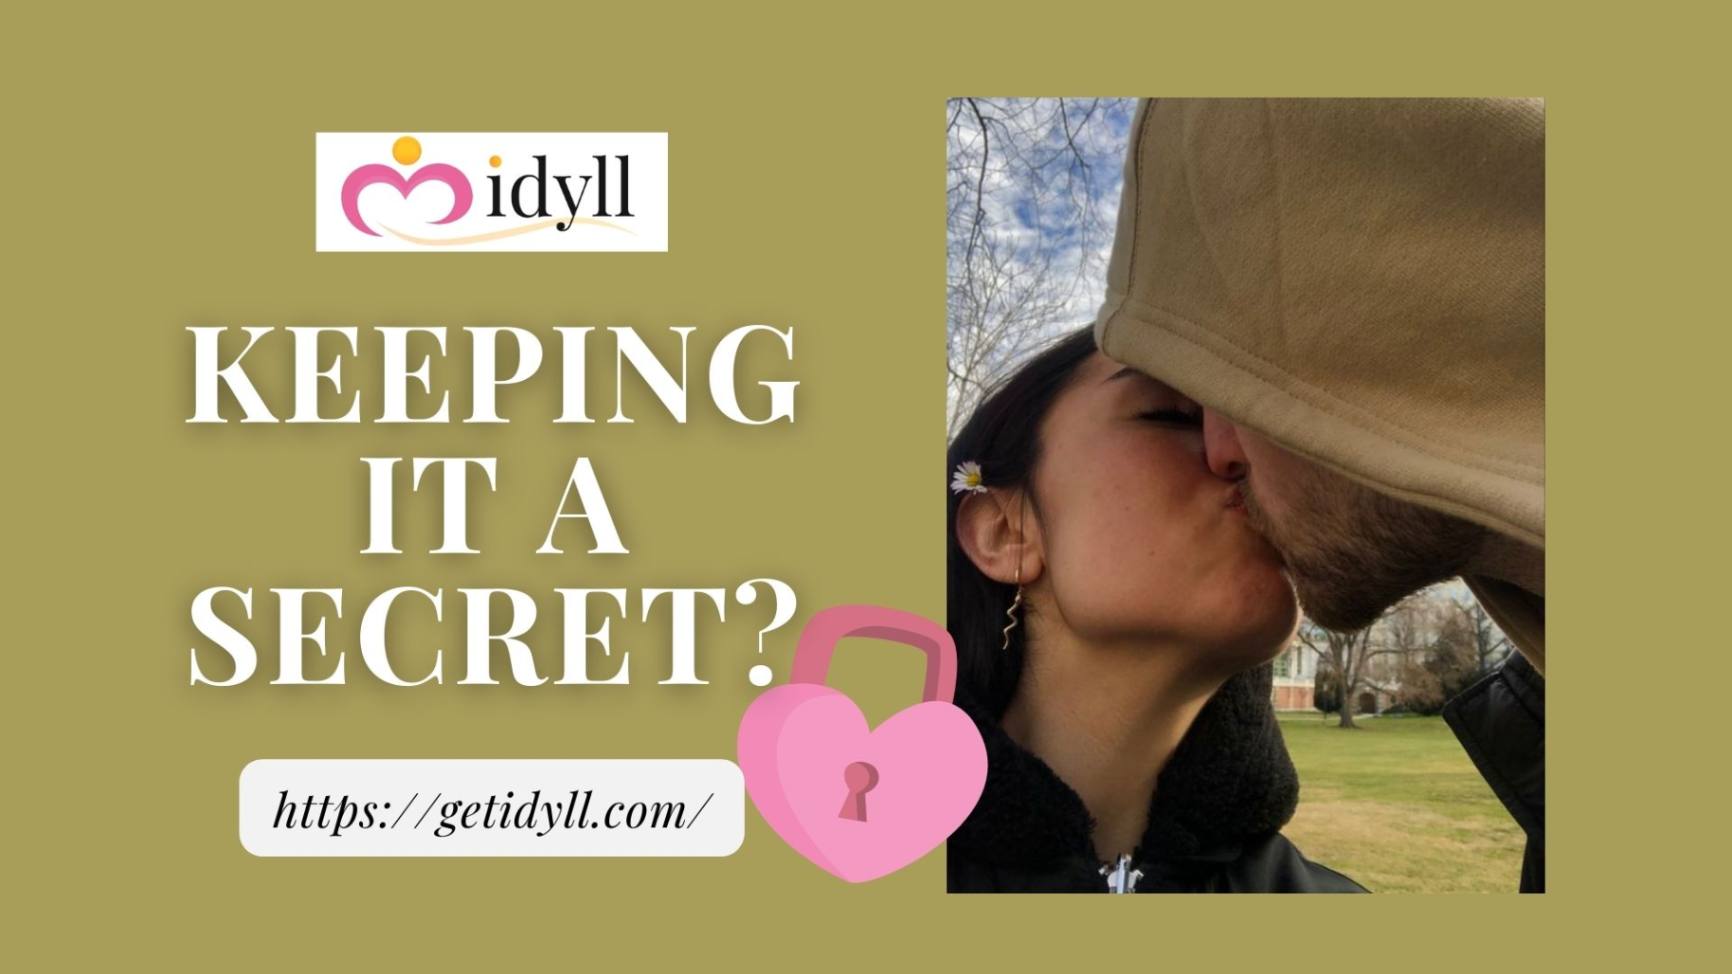 idyll, idyll dating, secret dating, flaunting your love, date, dating advice 